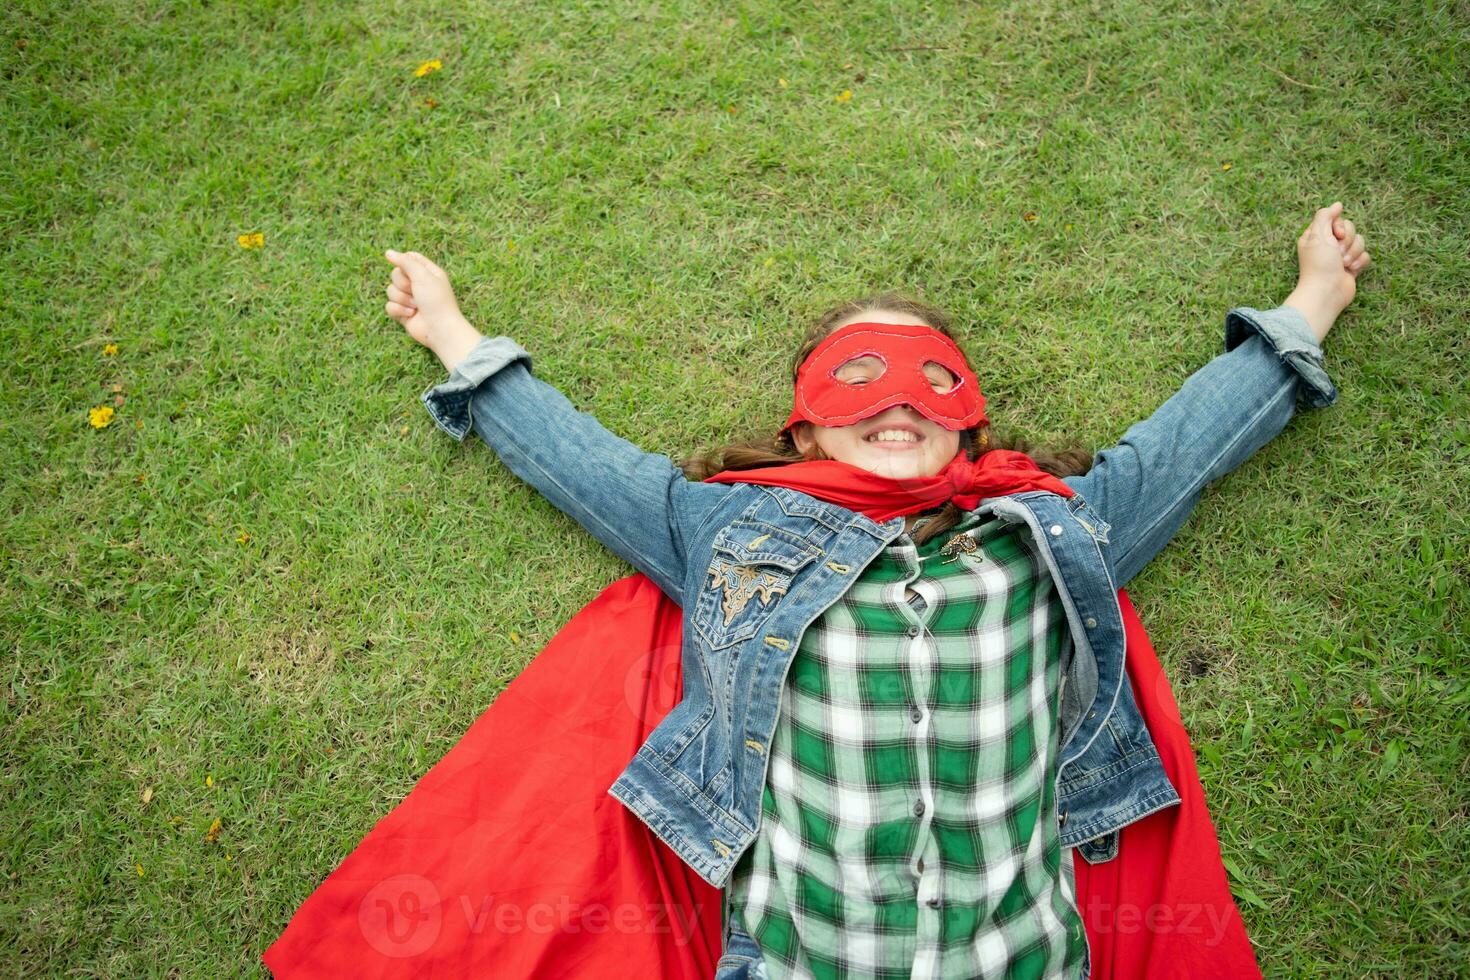 On a beautiful day in the park, a young girl enjoys her vacation. Playful with a red superhero costume and mask. photo